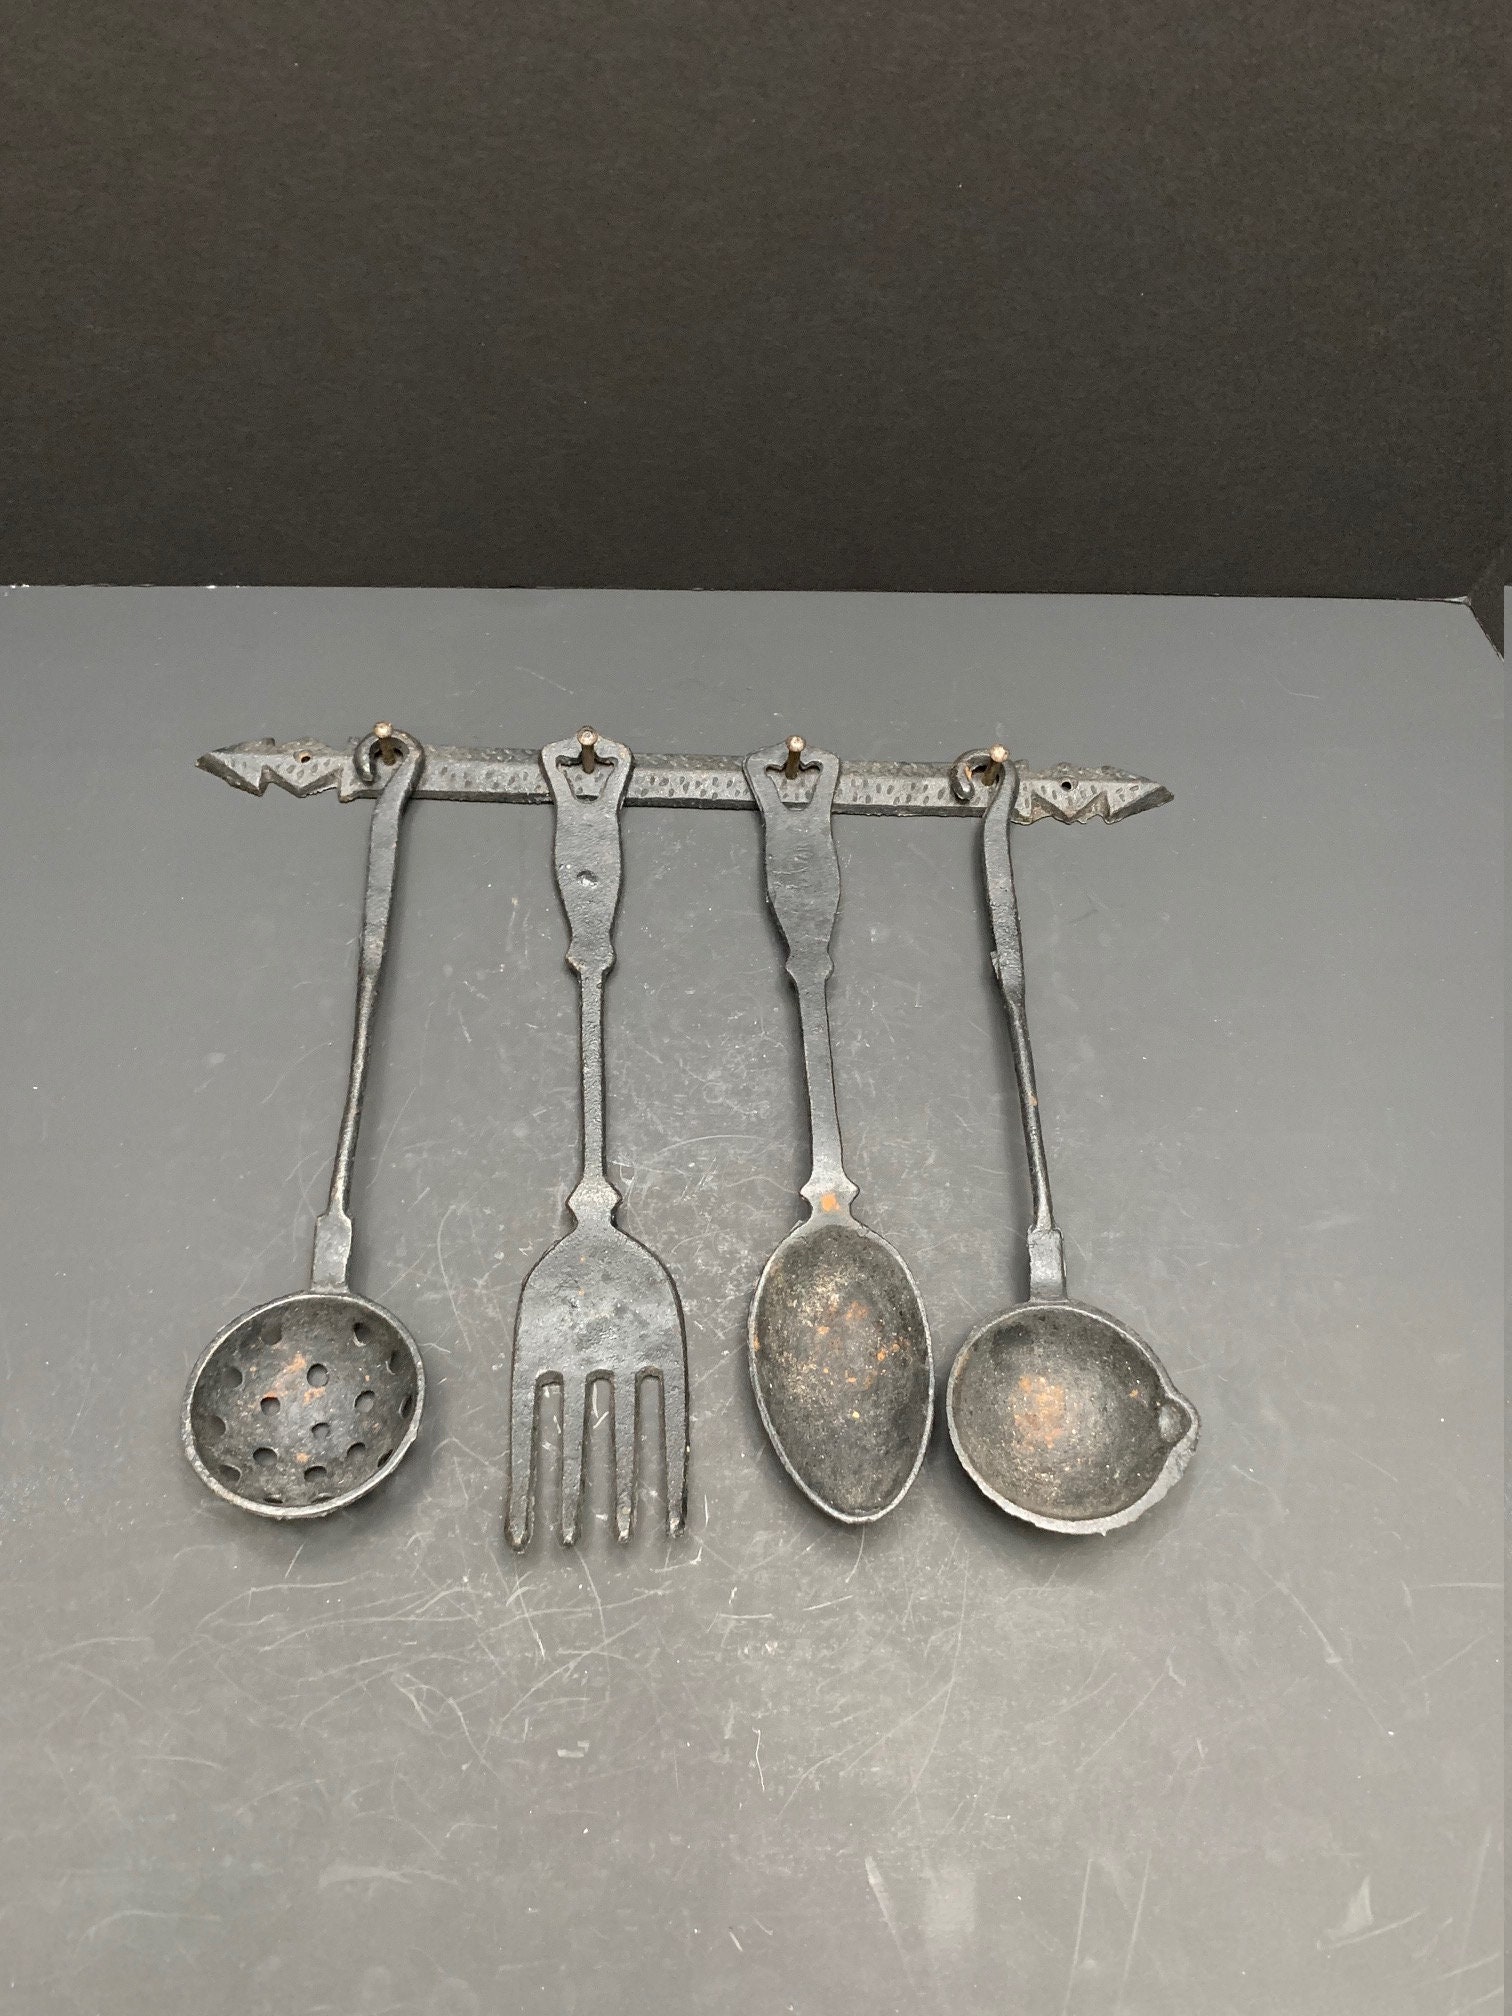 Vintage Cast Iron Utensil Set Fork, Spoon, Ladle And Strainer Marked Taiwan